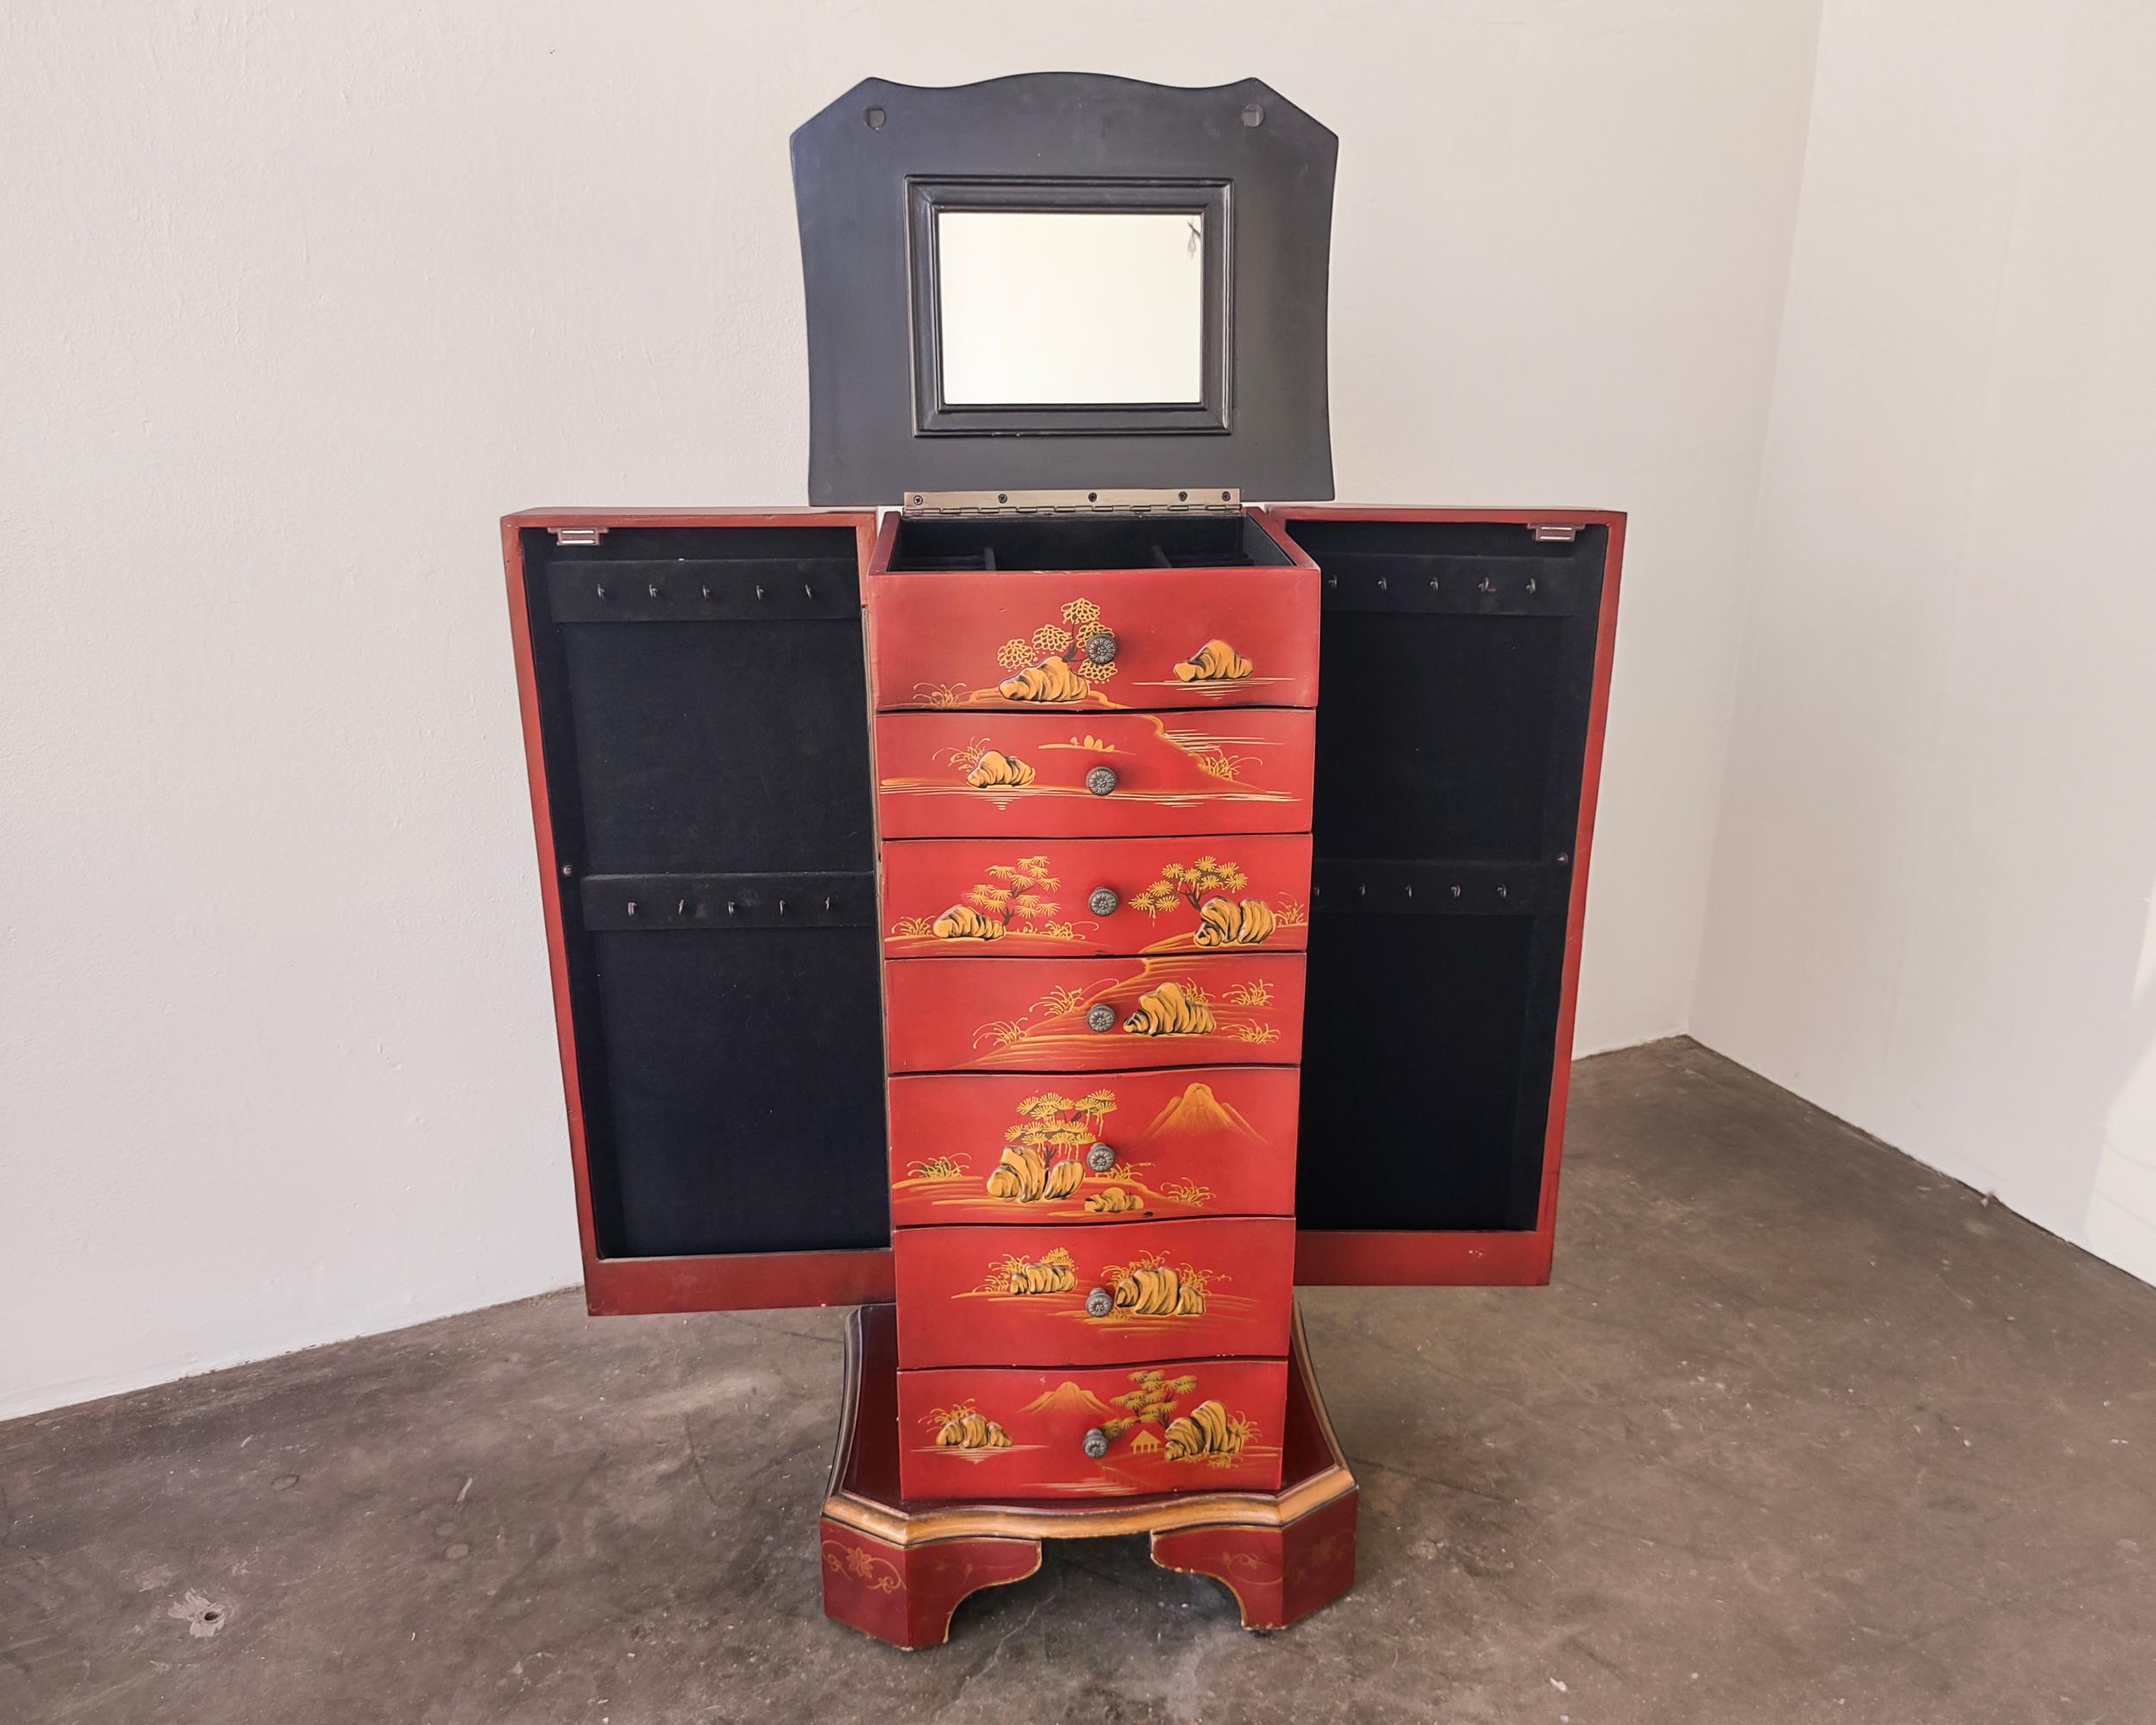 Red Chinese upright jewelry chest with raised elements and beautiful gold hand painted scenes. Top opens up to vanity mirror and divided storage, six drawers down the center, each side opens up with hook storage. Overall great original condition,